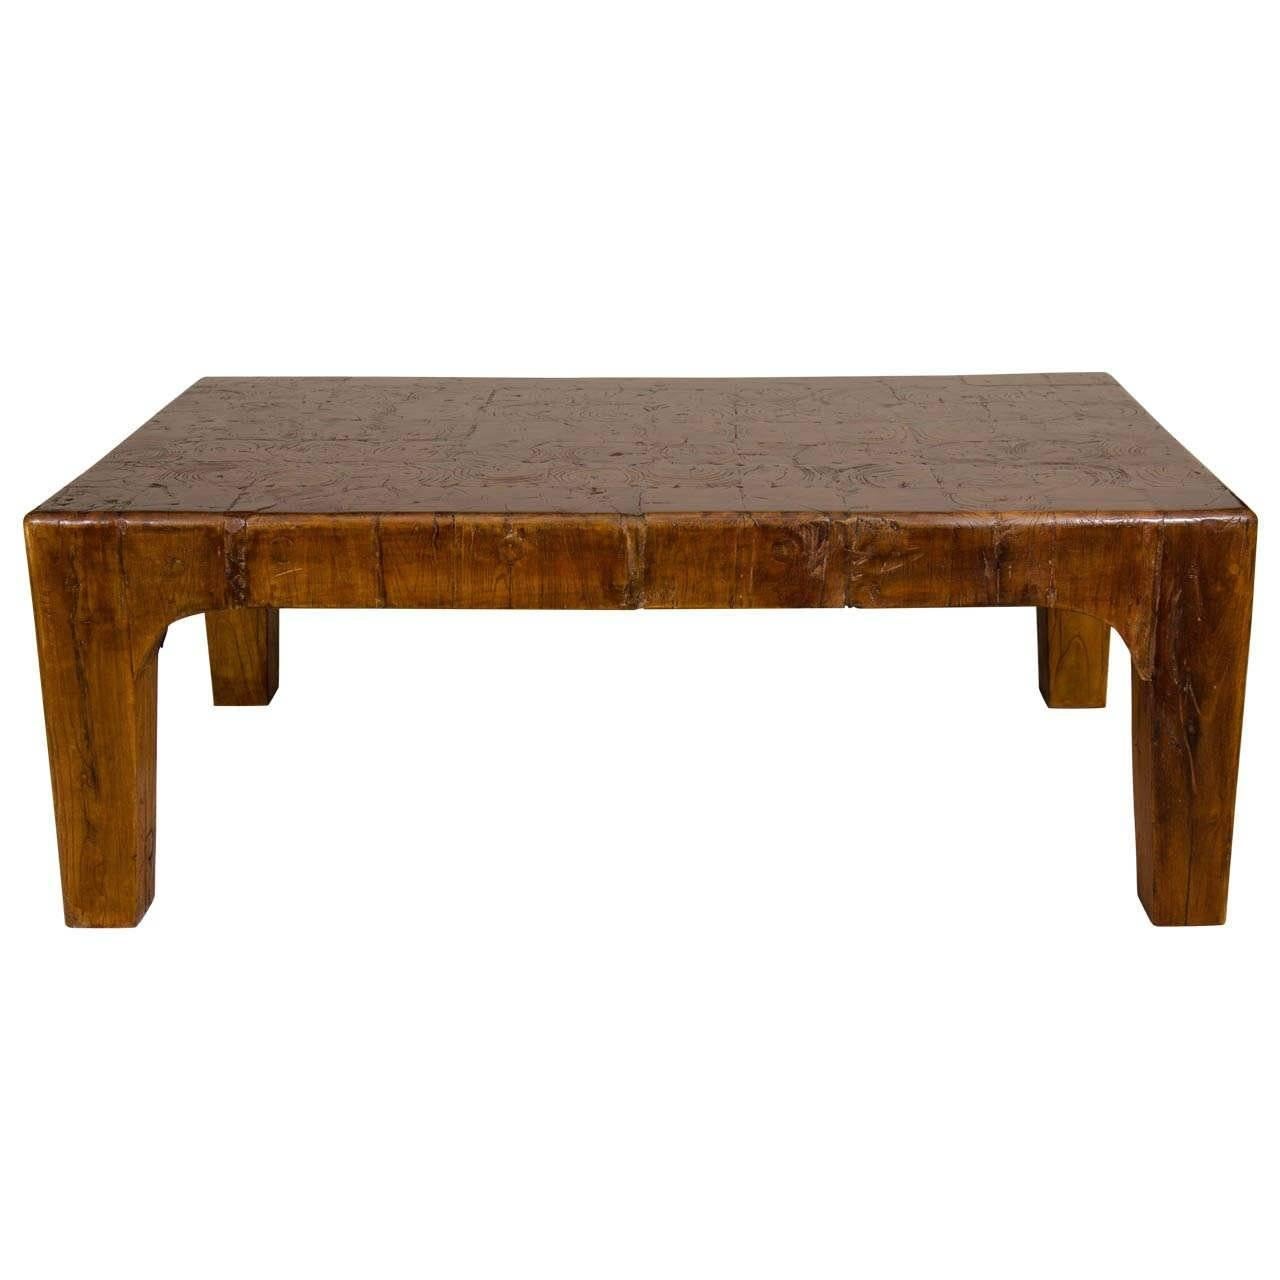 Natural Wood Block Rectangular Coffee or Cocktail Table